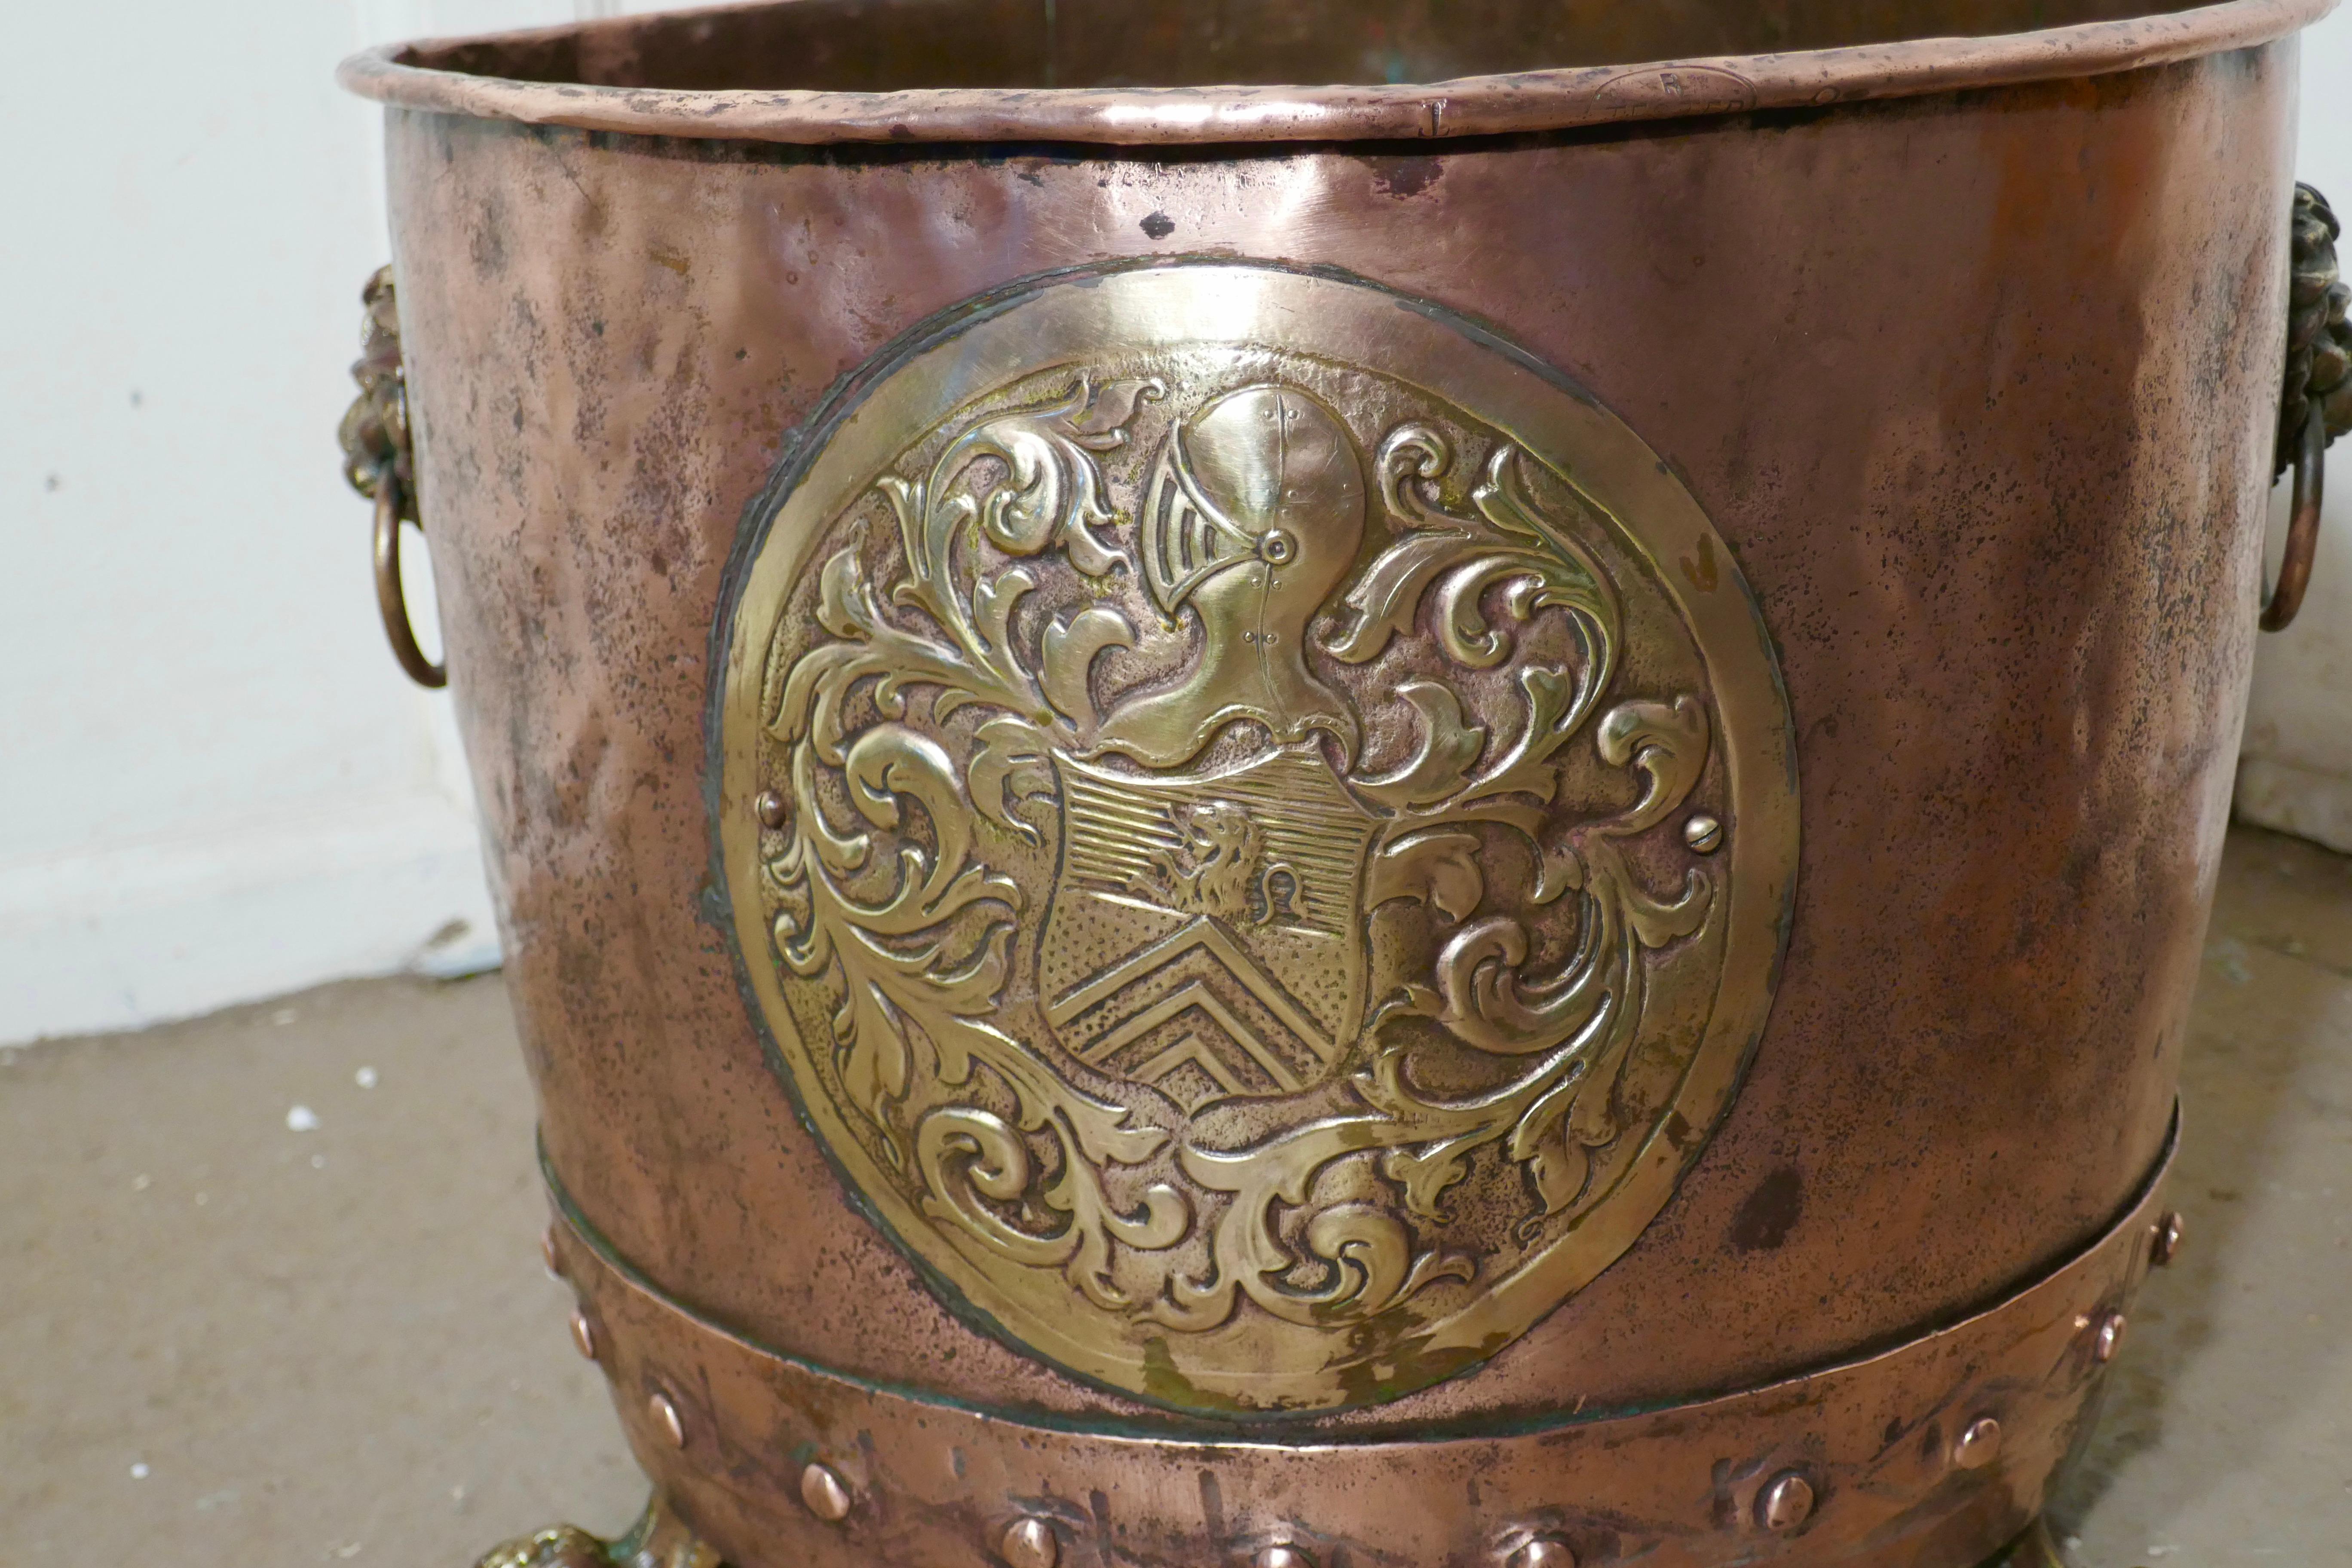 19th century copper log bin or planter

This is a superior quality copper, it has a riveted construction, and is no longer required to heat water in it has a brass heraldic crest on the front lions mask ring handle and three strong lions paw